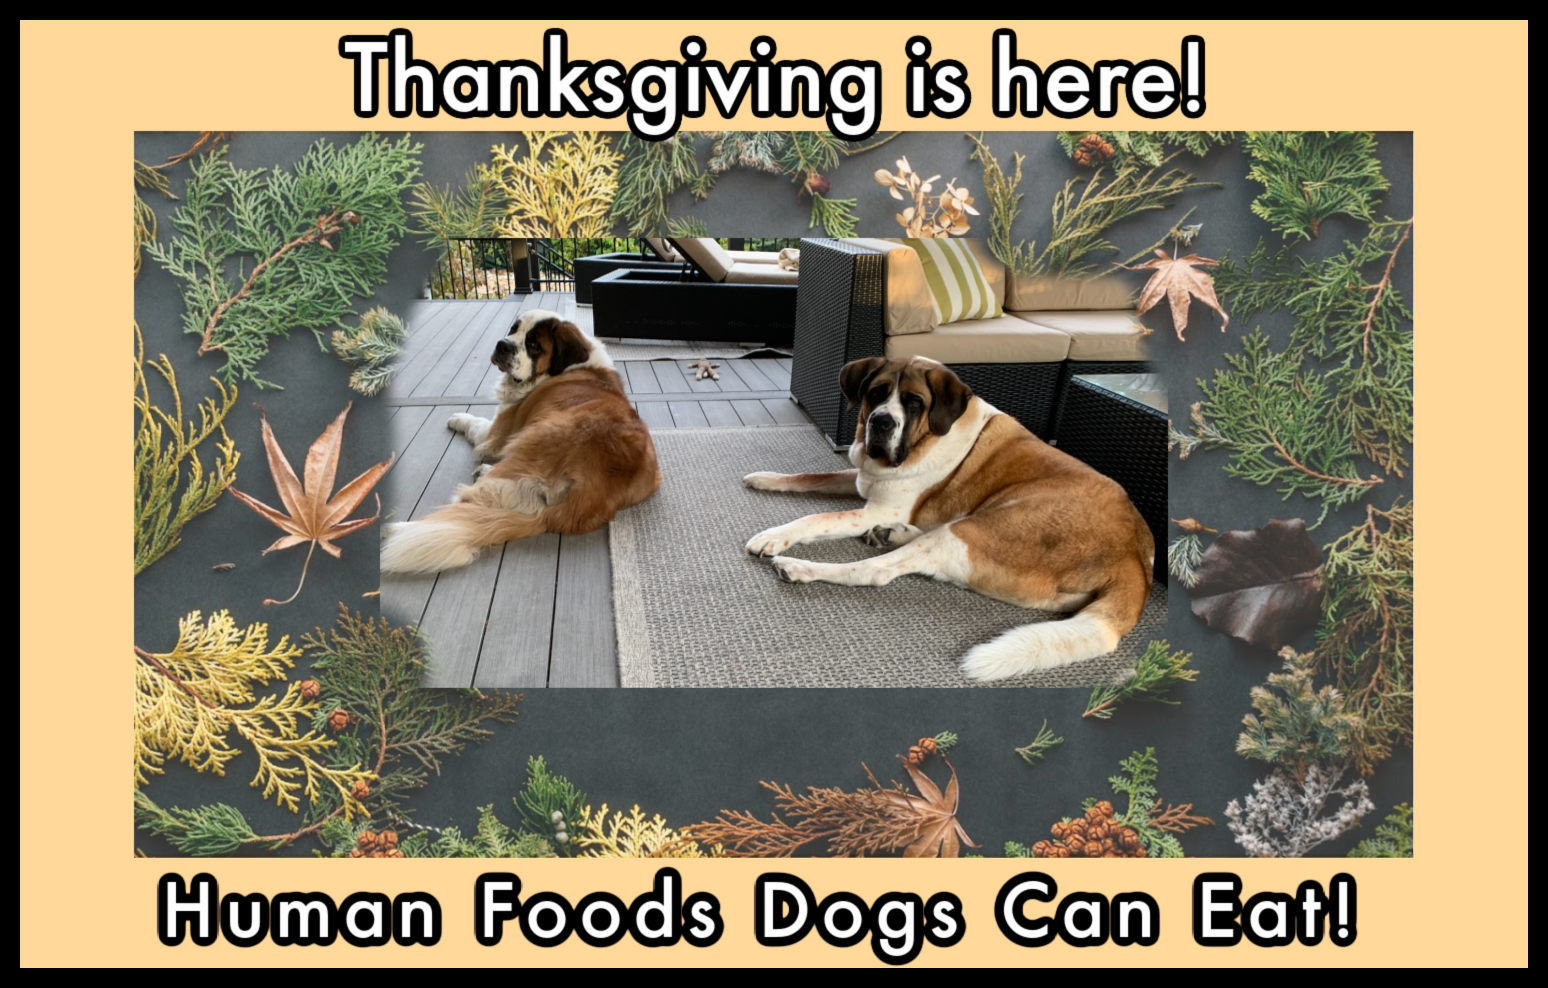 25 Human Foods Dogs Can and Can't Eat - Comprehensive 2022 List